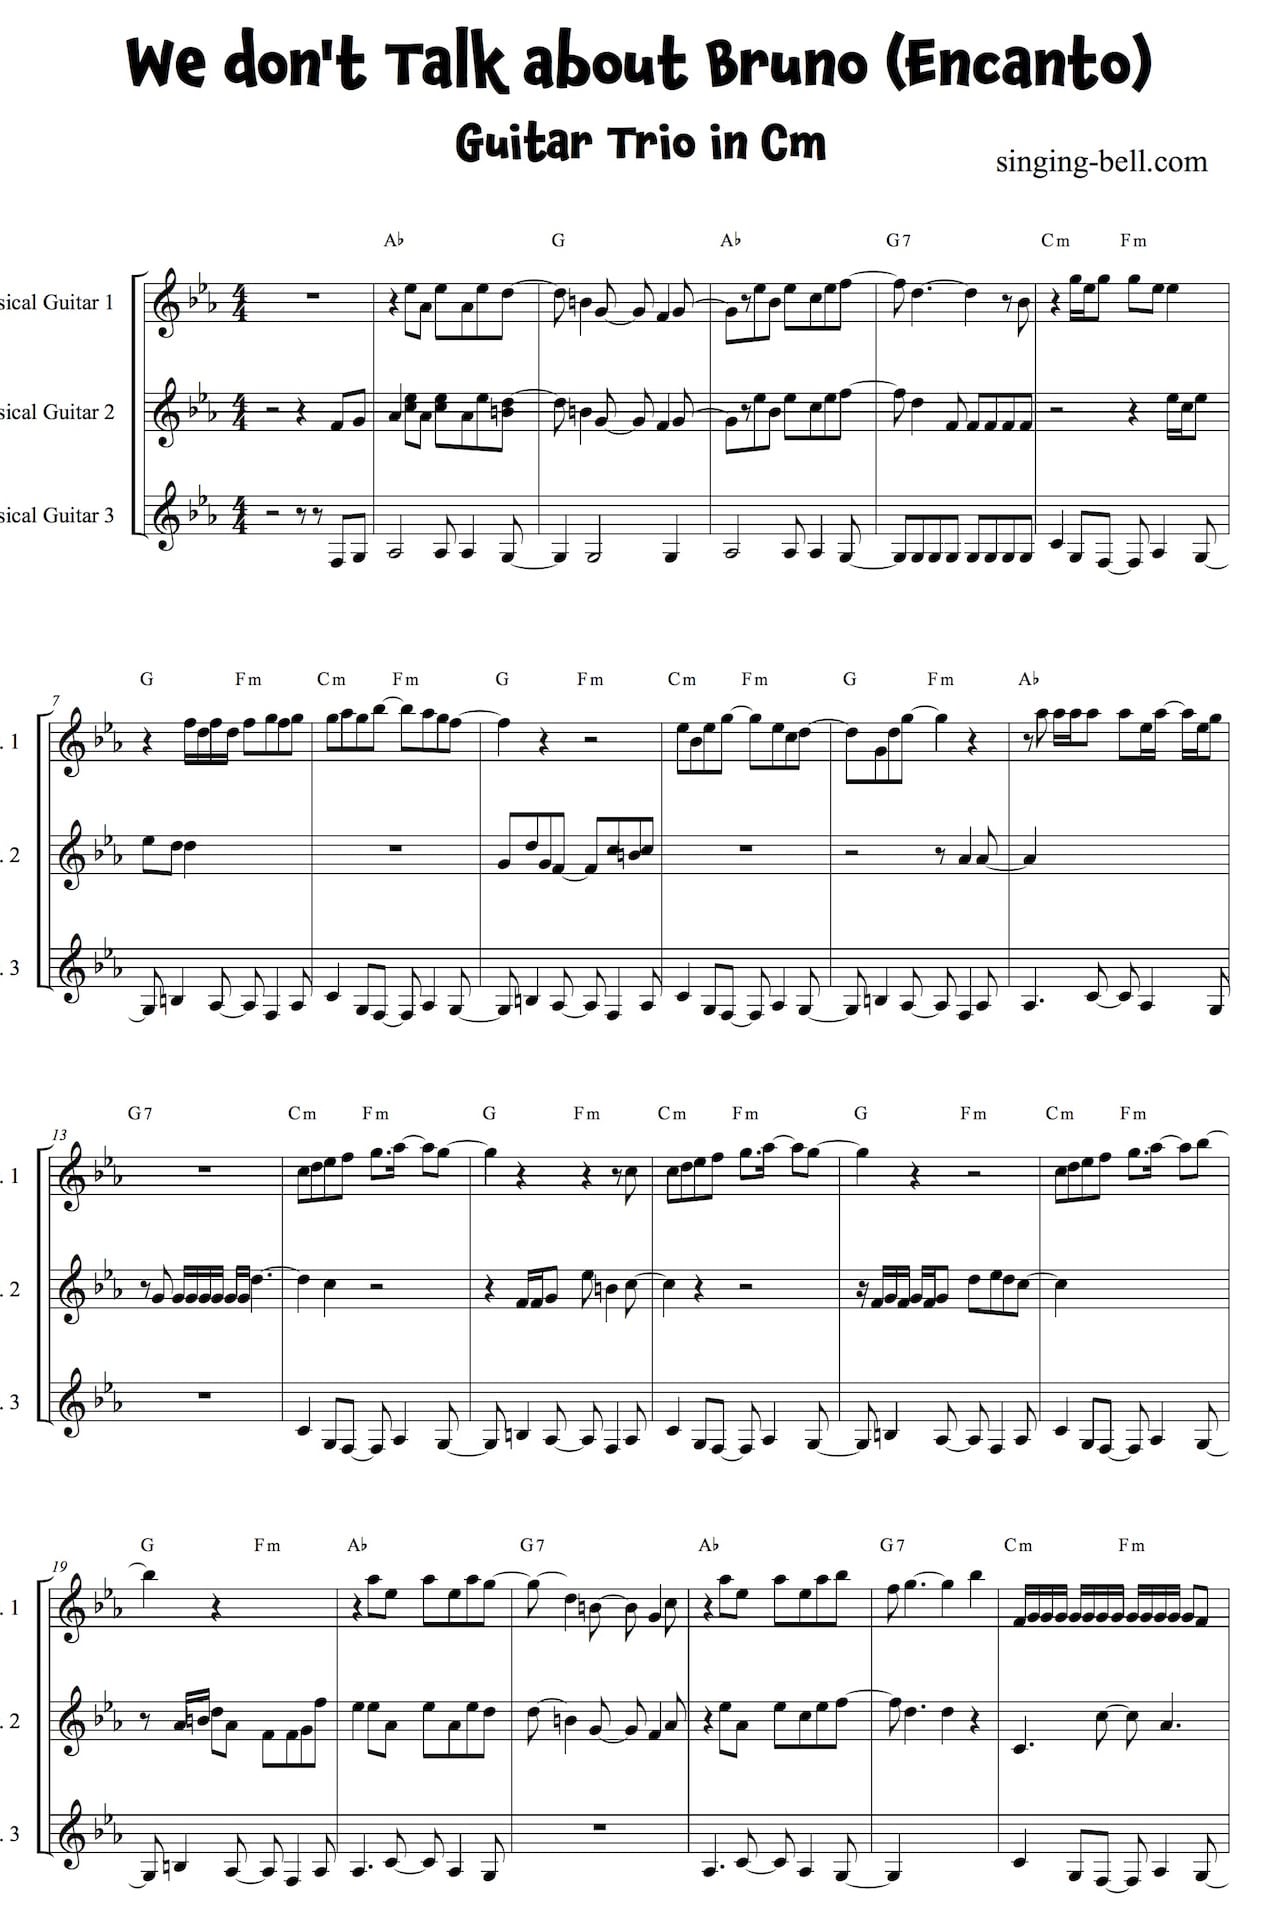 We Don't Talk About Bruno Encanto easy Guitar Trio Sheet Music Notes in Cm - page 1.